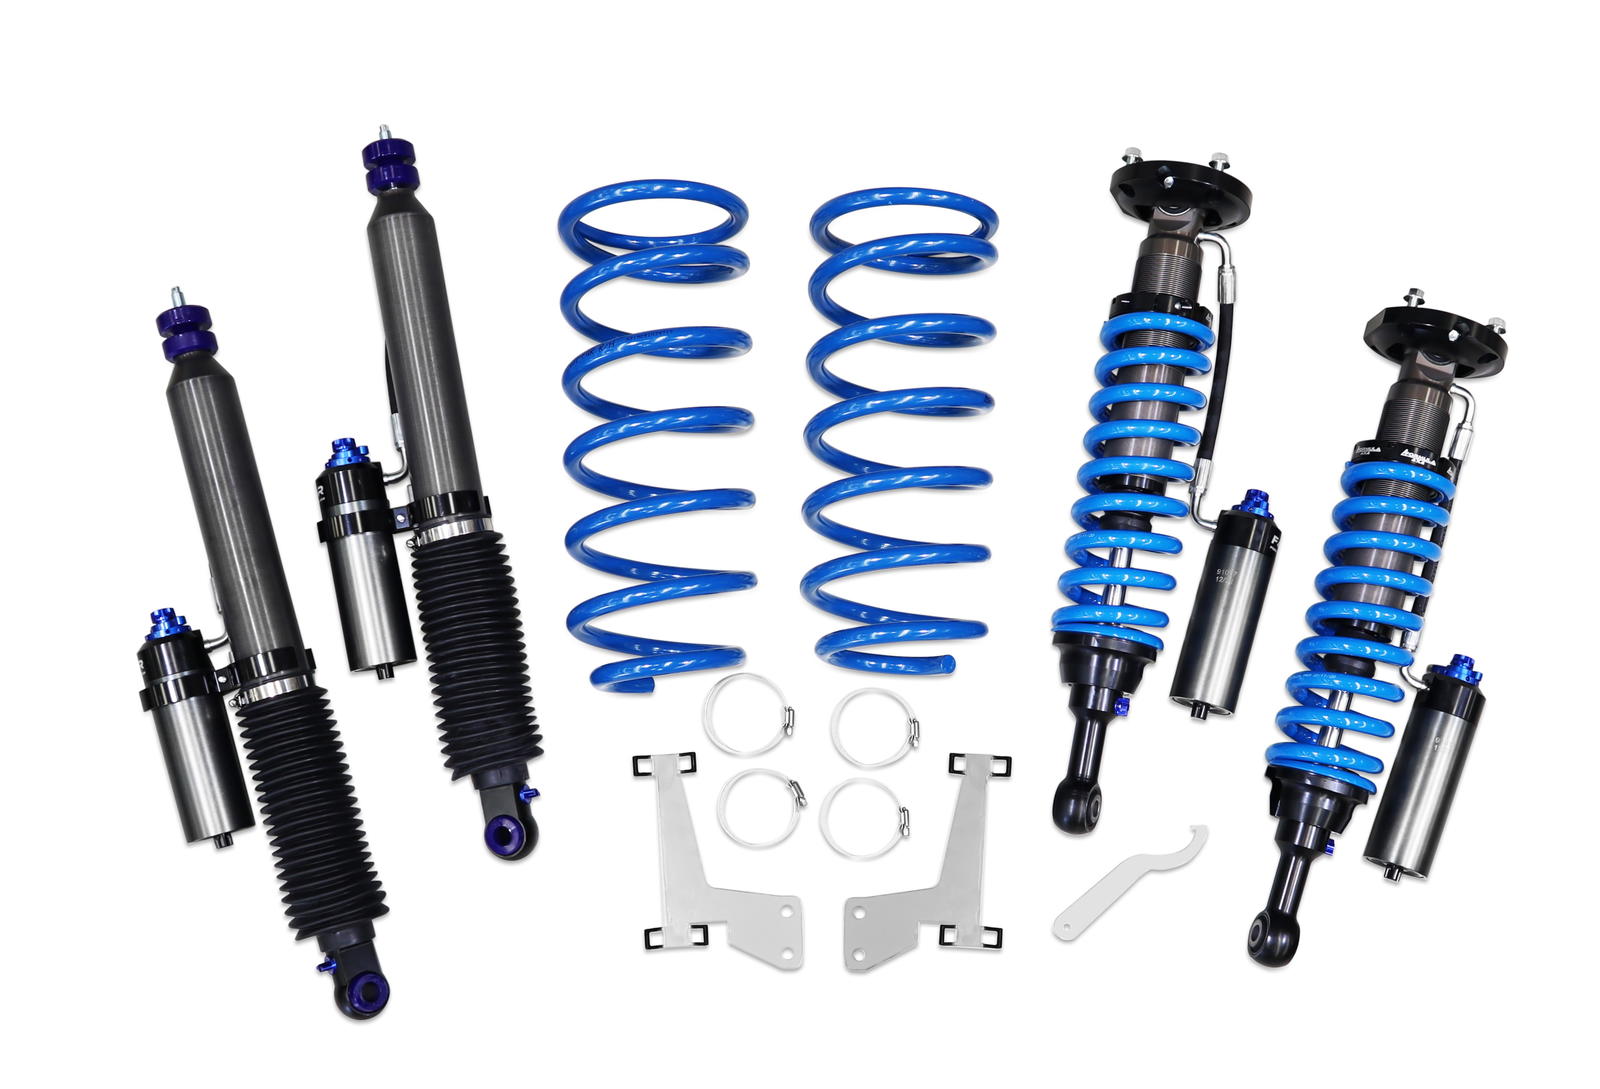 2-3 Inch Adjustable F4R Formula 4x4 Lift Kit to suit Toyota Land Cruiser 200 Series (non KDSS Vehicles) 2007-2021